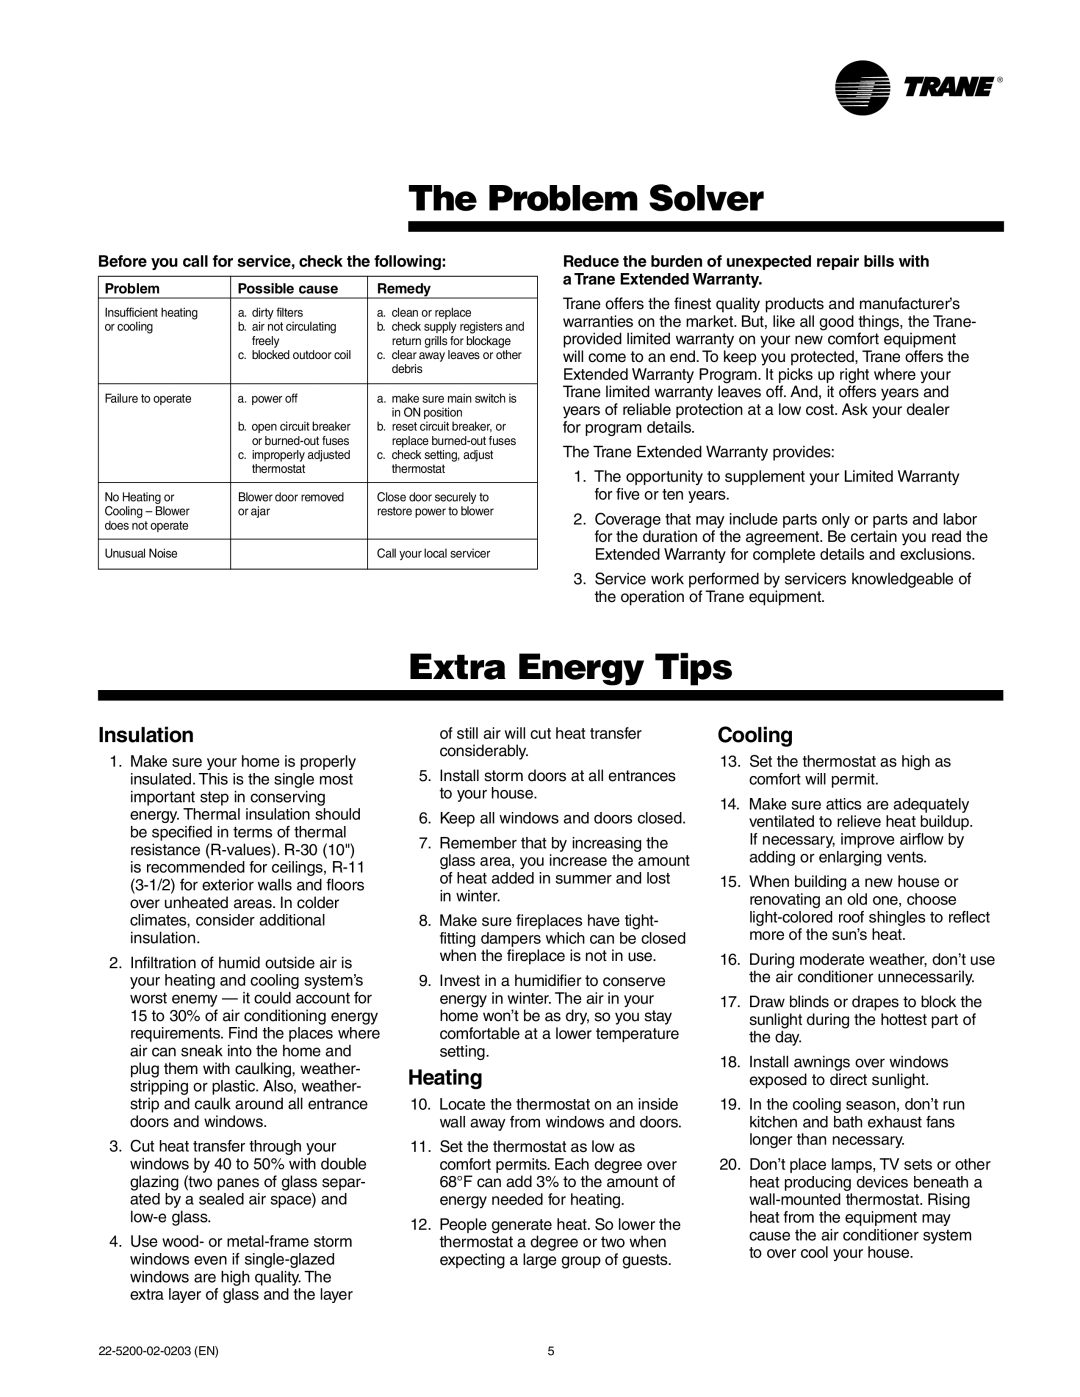 Trane XE1000, XE1200, XE1100 manual The Problem Solver, Extra Energy Tips, Insulation, Heating, Cooling 